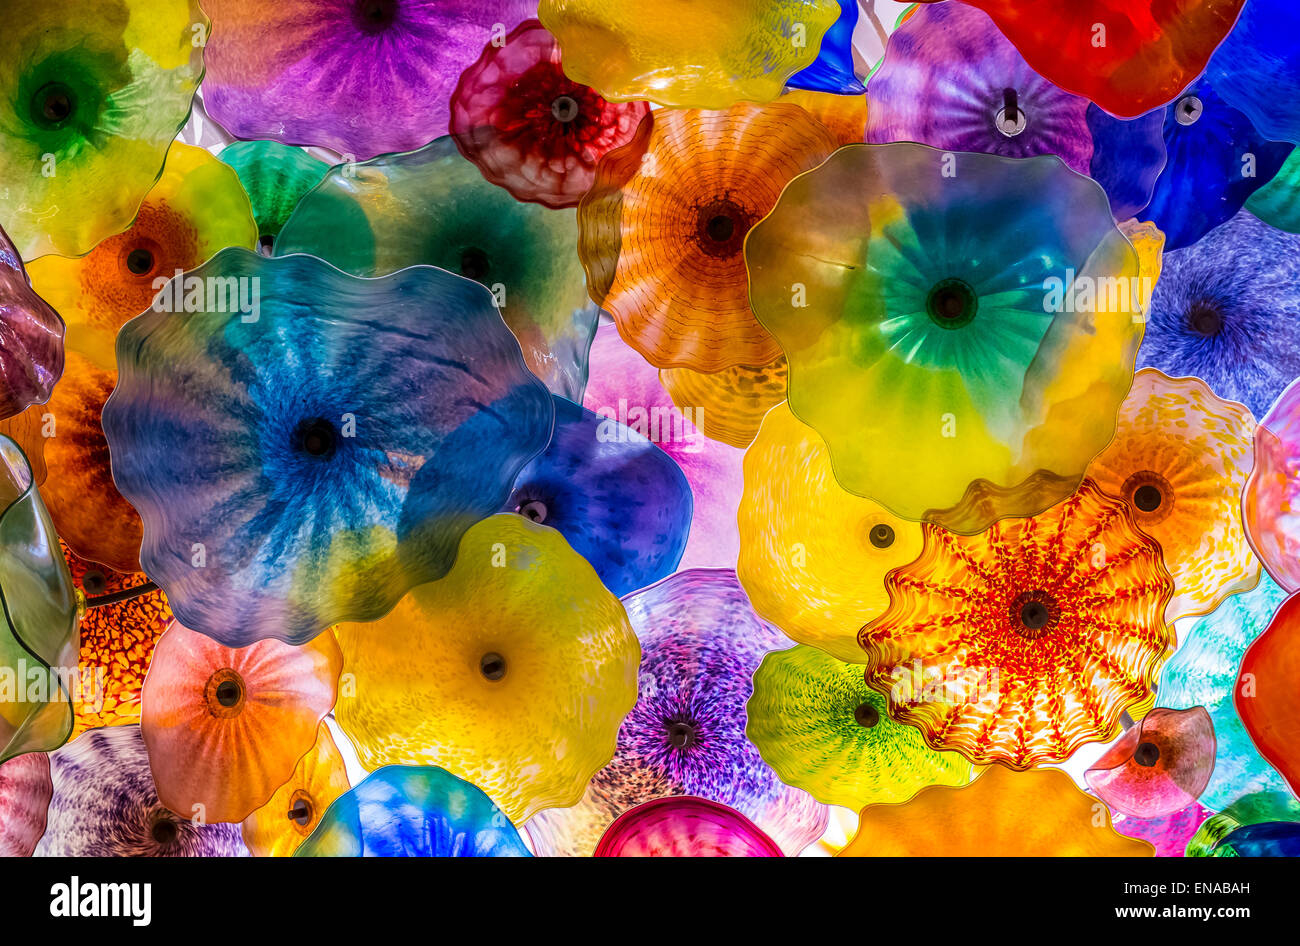 The Hand Blown Glass Flower Ceiling At The Bellagio Hotel In Las